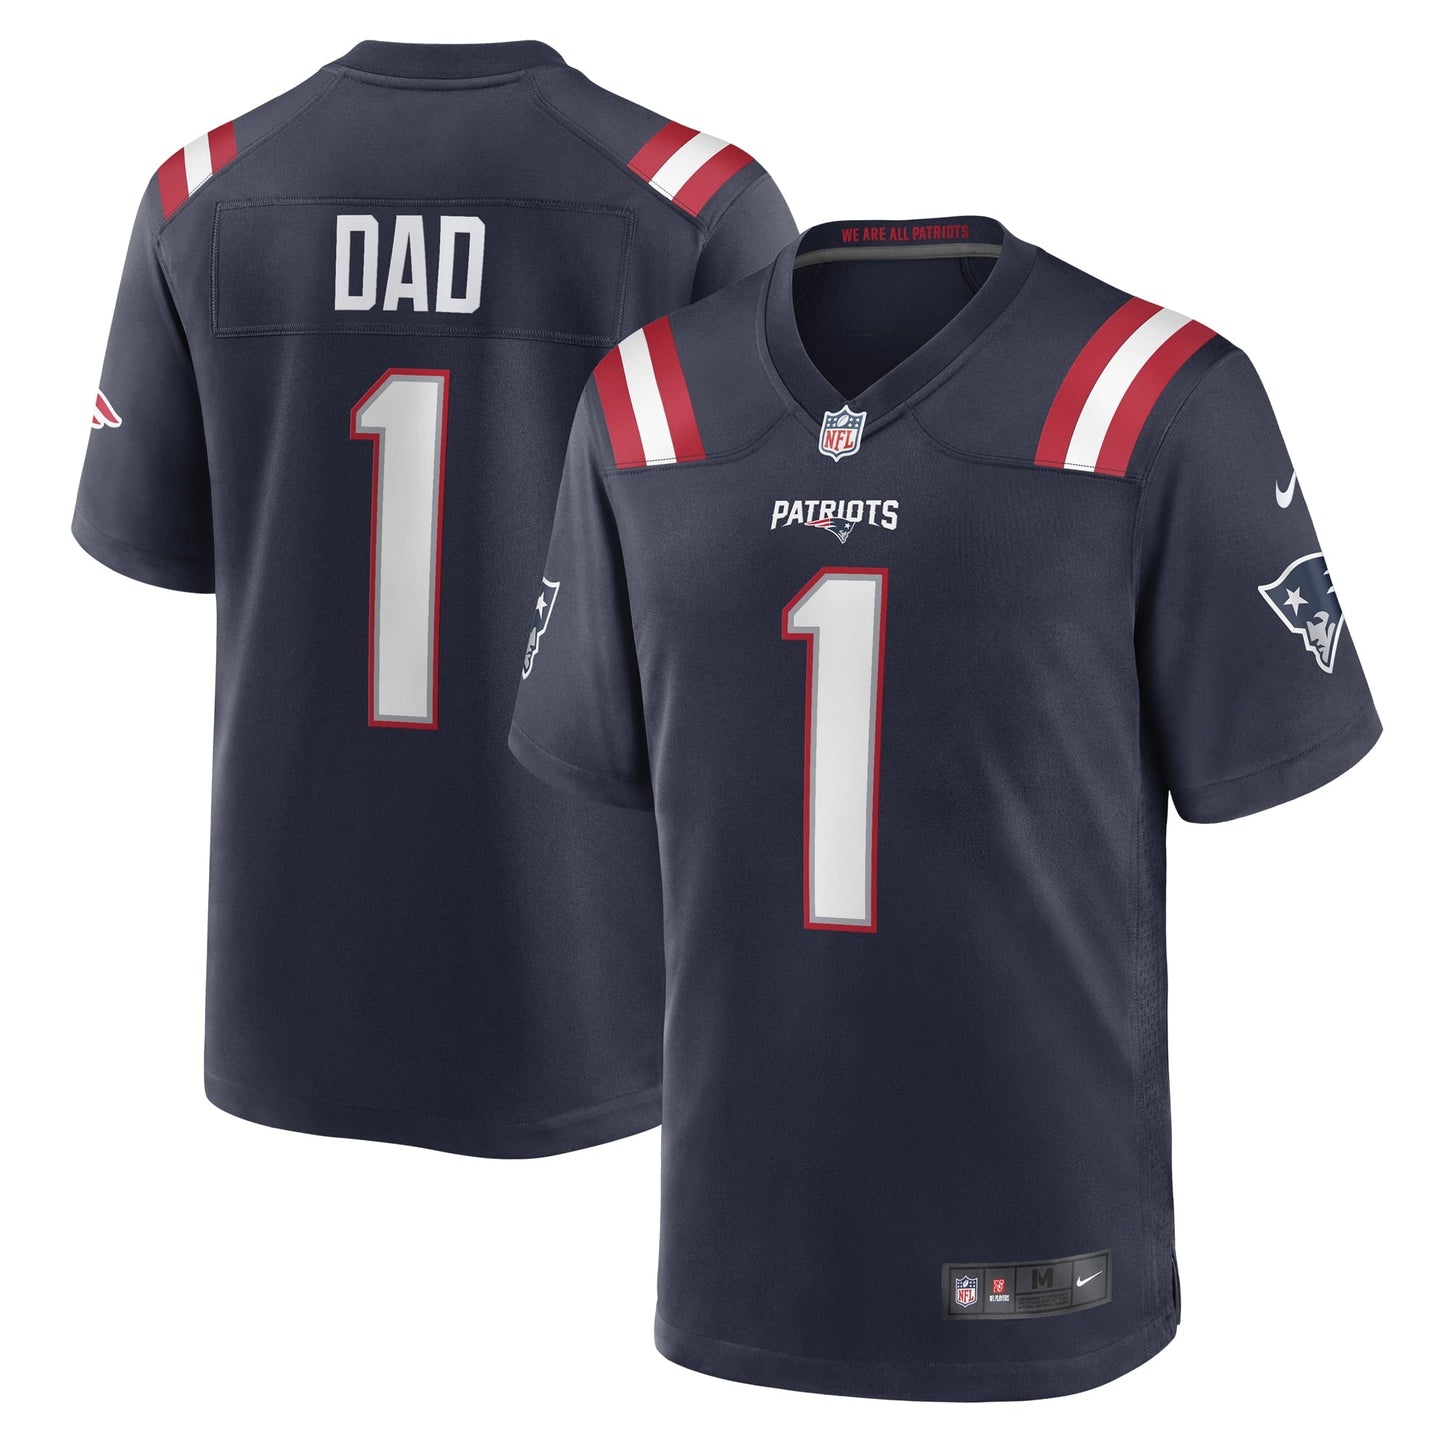 Men's Nike Number 1 Dad Navy New England Patriots Game Jersey